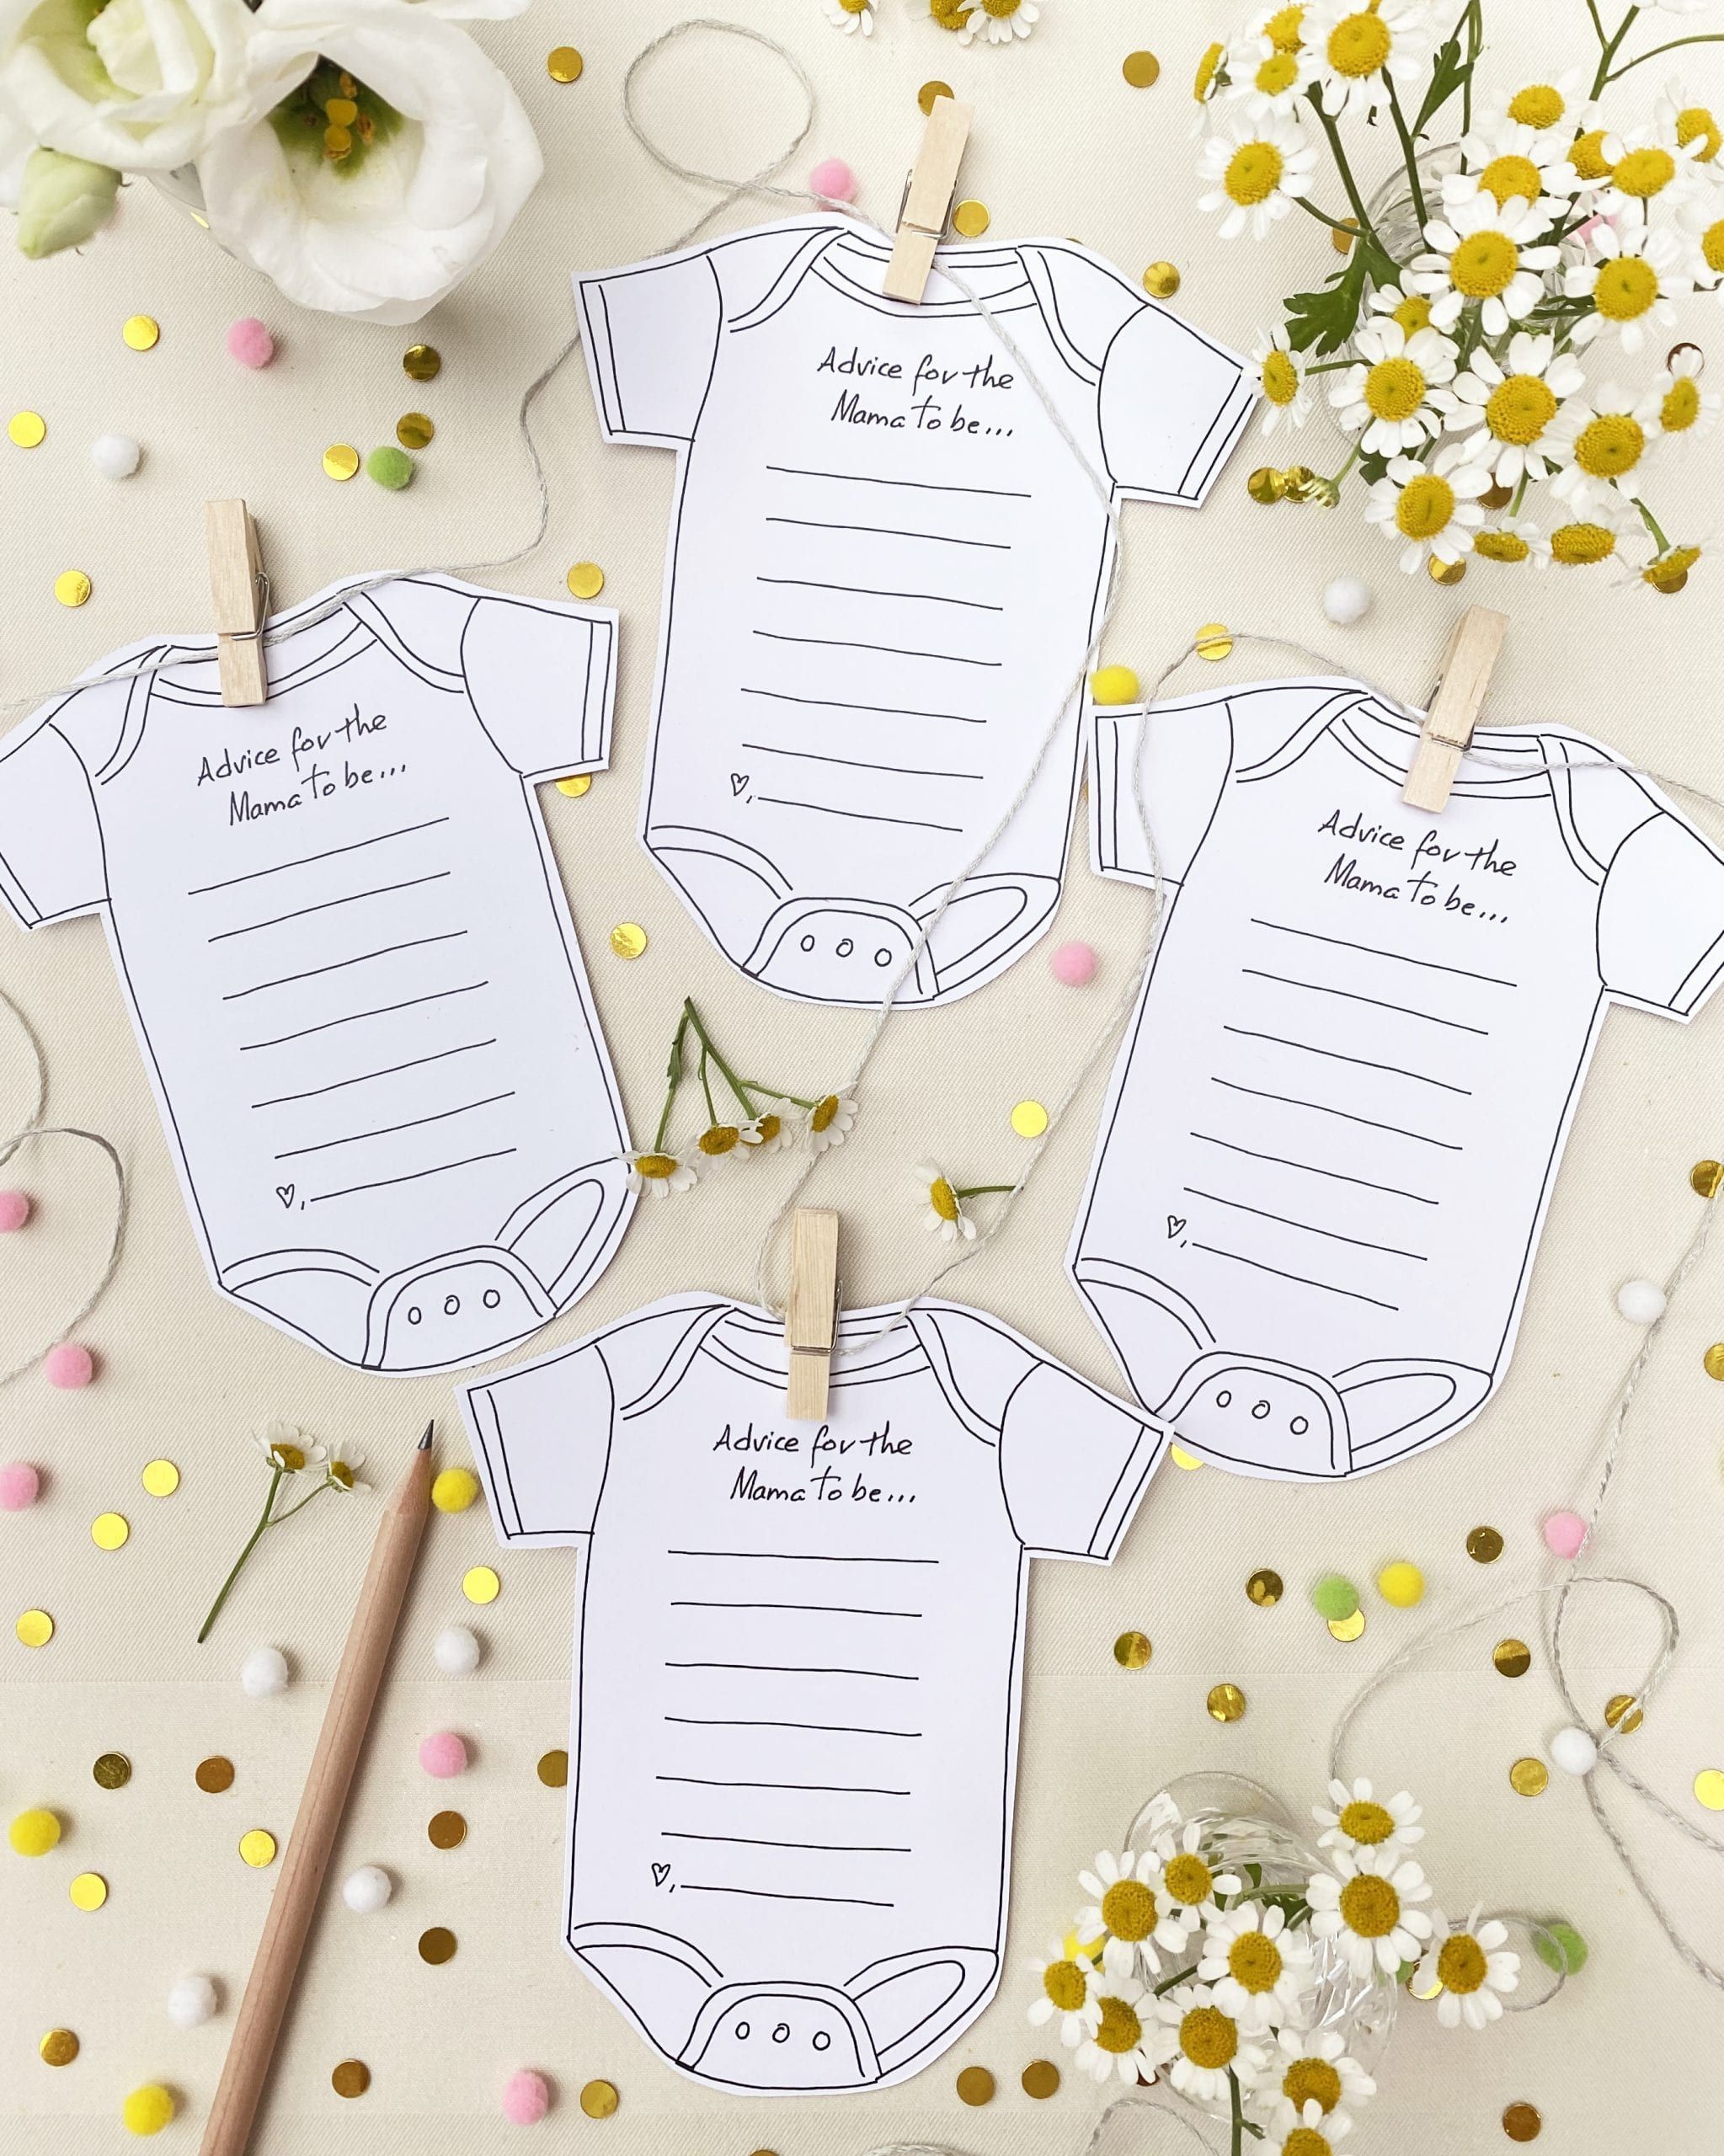 How to Host a Non-Awkward Baby Shower - Leah and Joe: Home DIY Projects &  Crafts